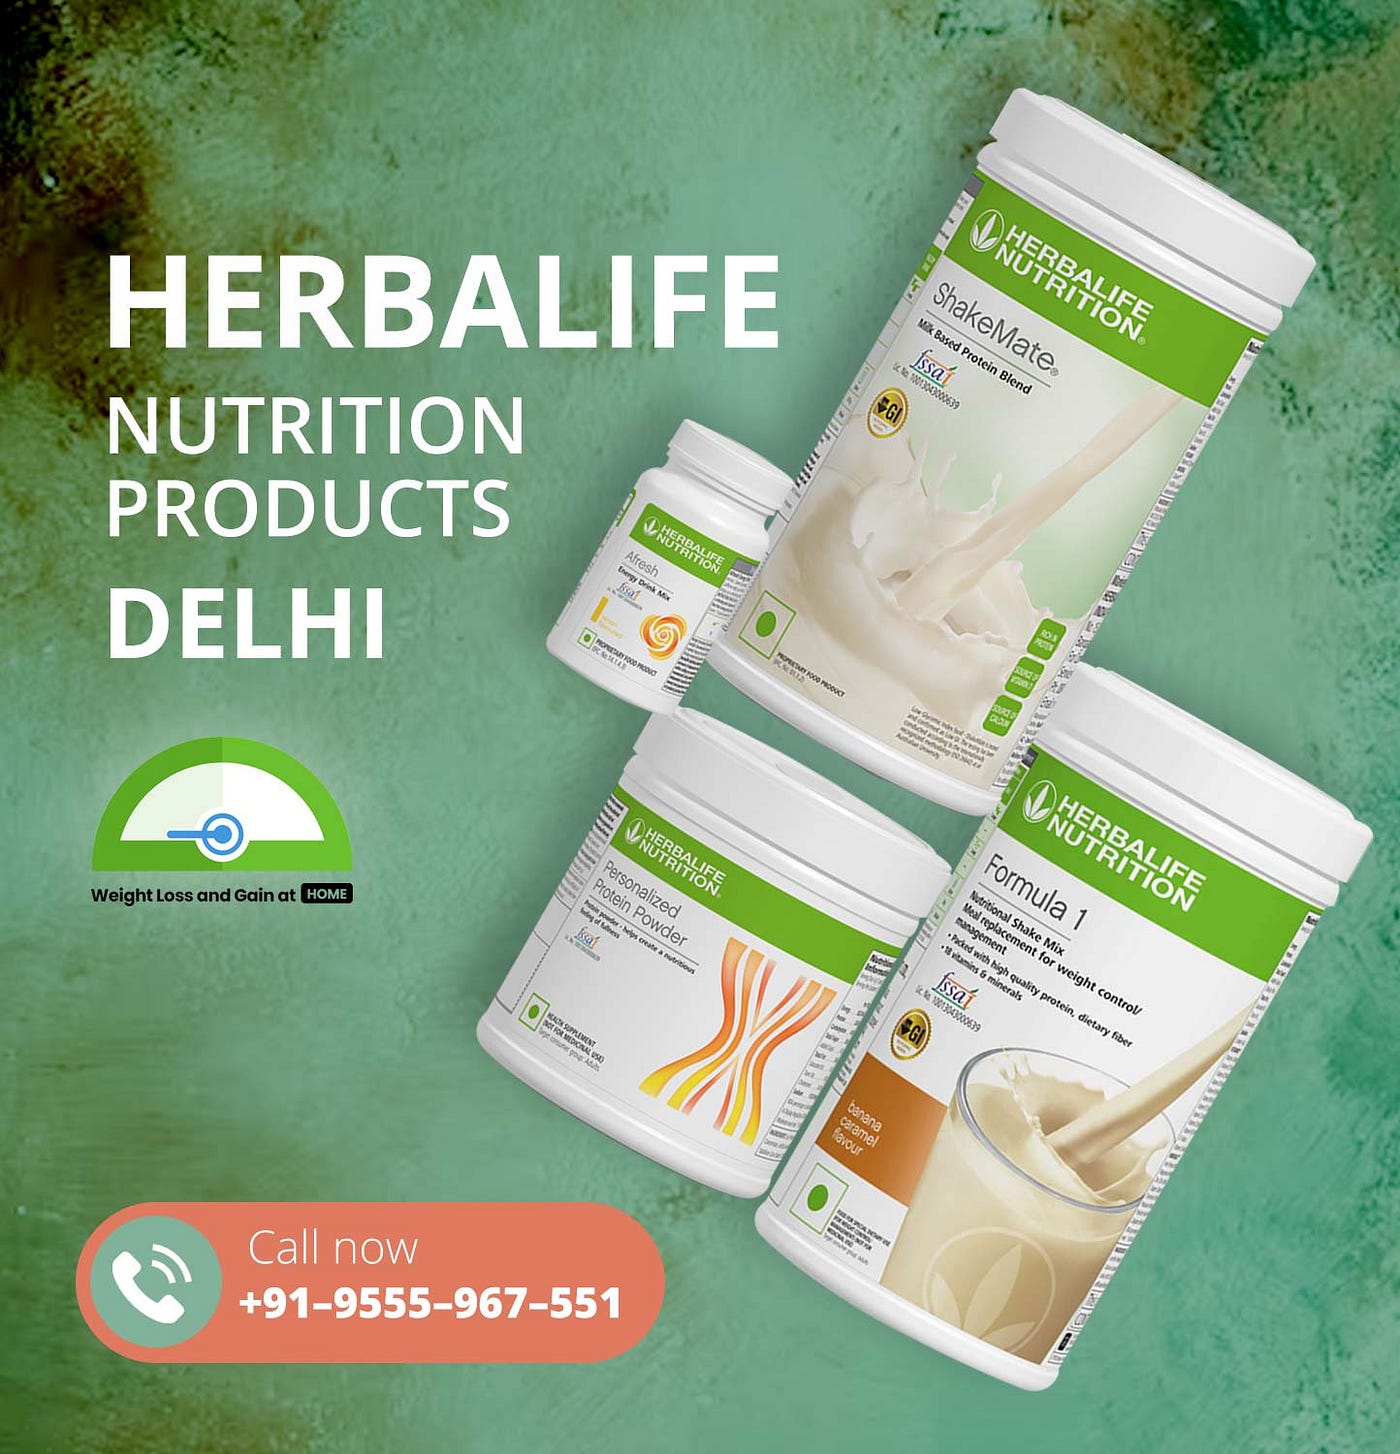 Herbalife nutrition products near Saket, by Weight loss and gain at home